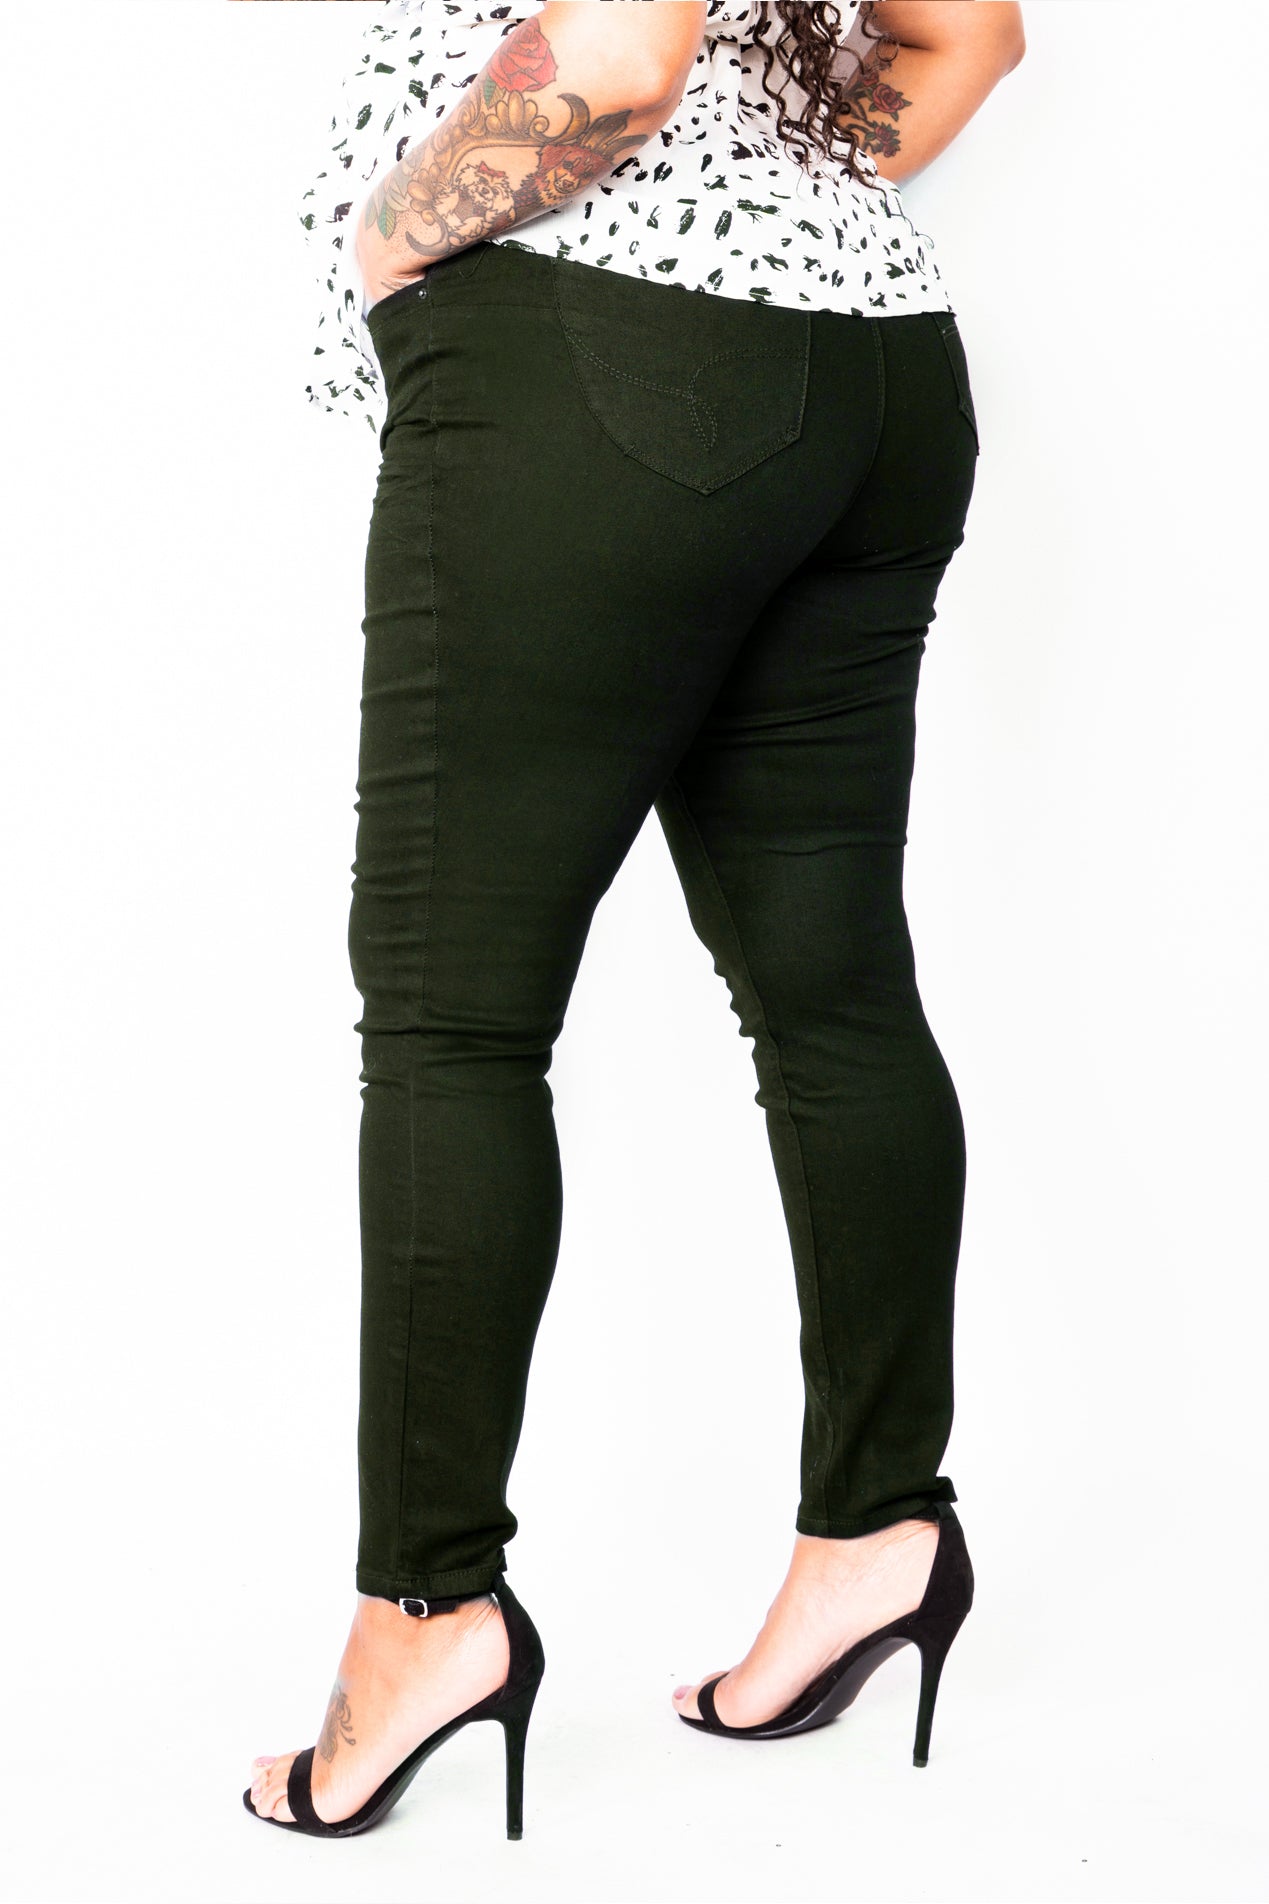 The Want a Better Bum Denim Jean with Skinny fit